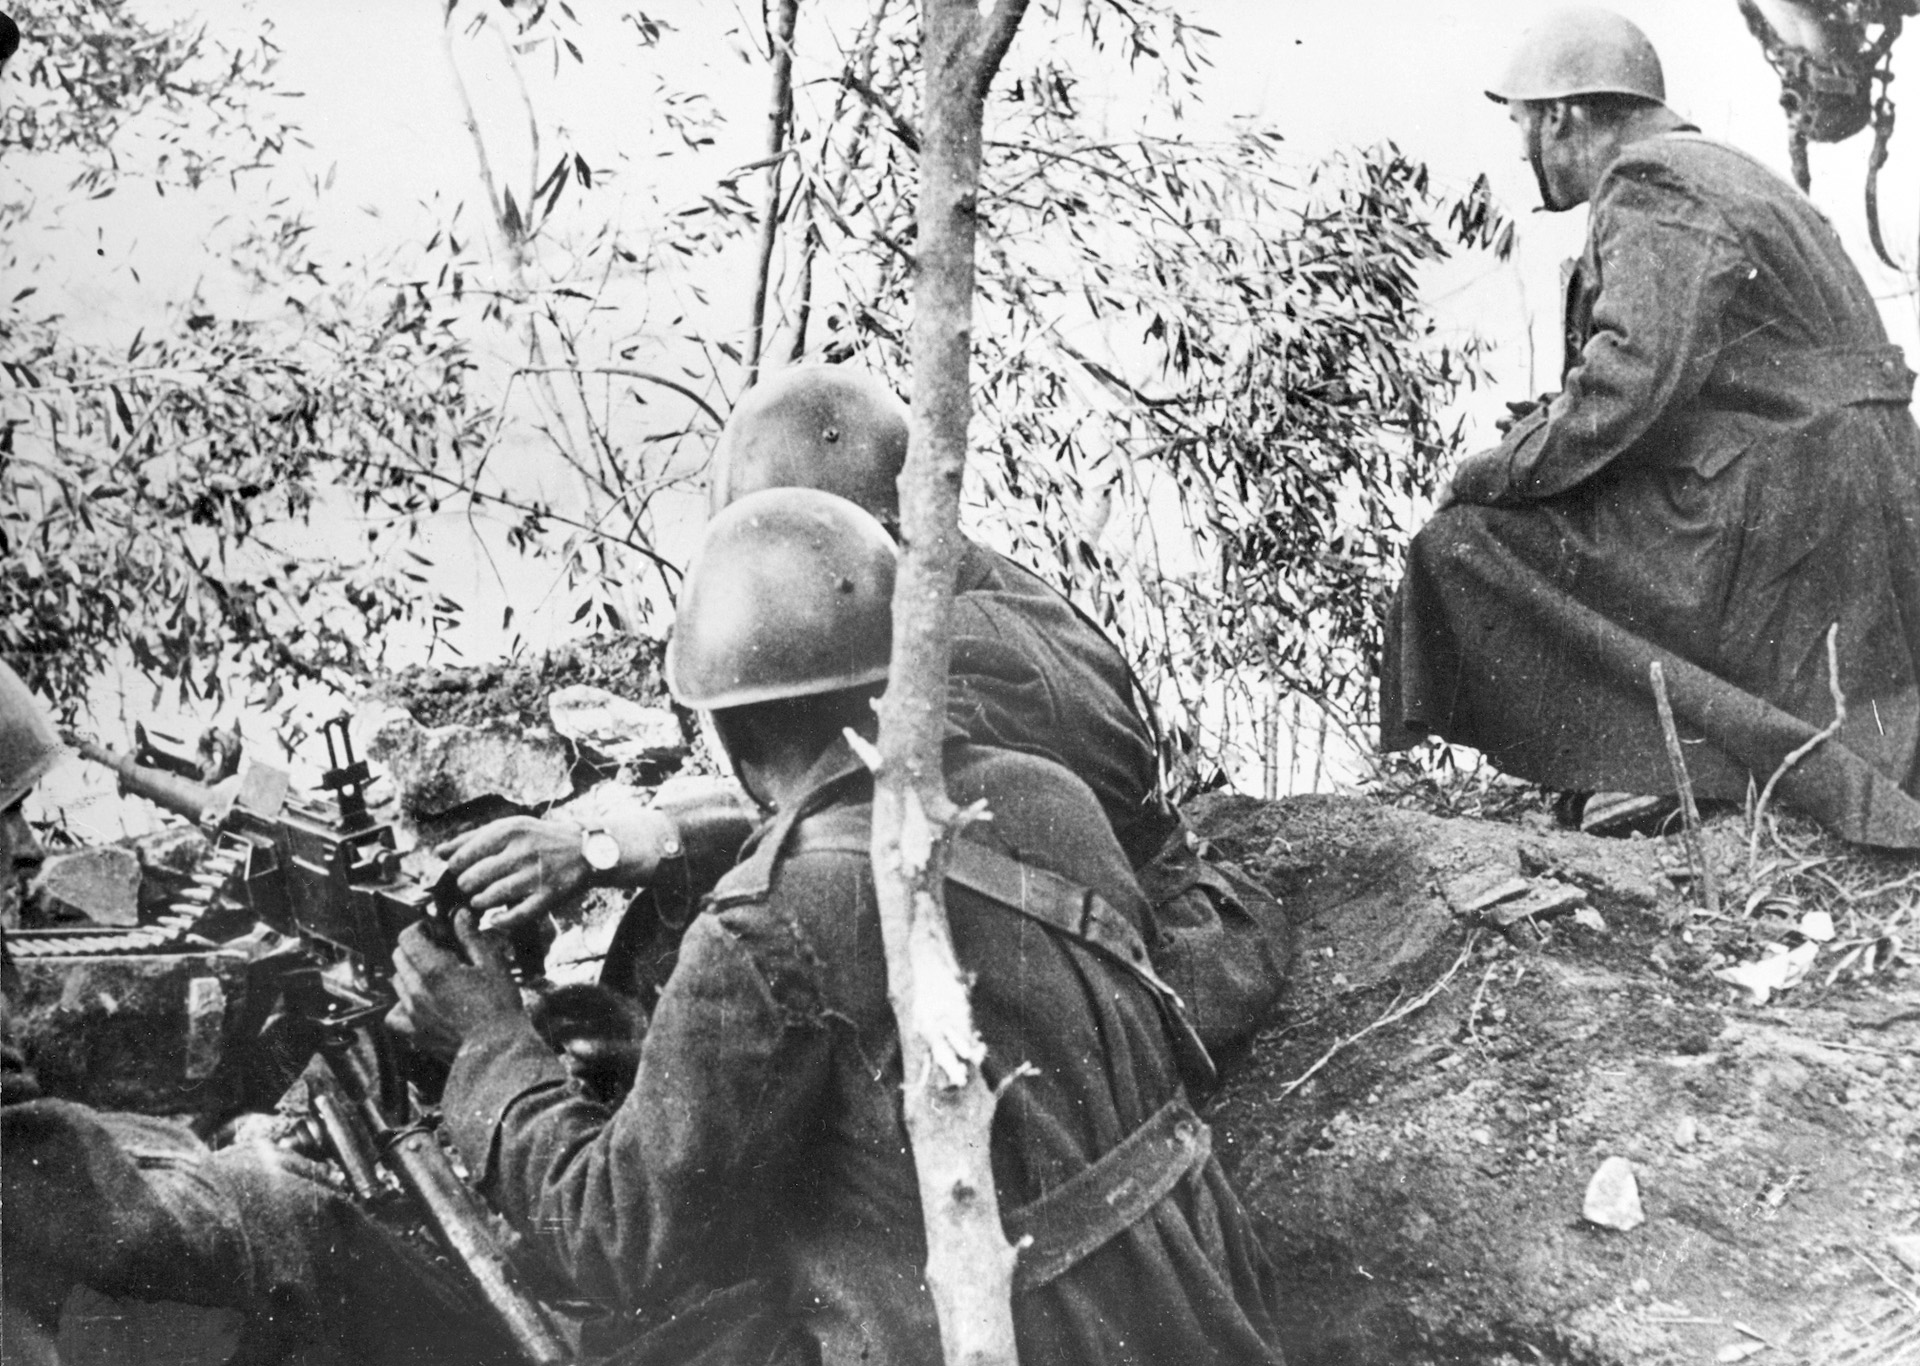 Italian soldiers man a machine gun on the Albanian frontier with Greece in February 1941.